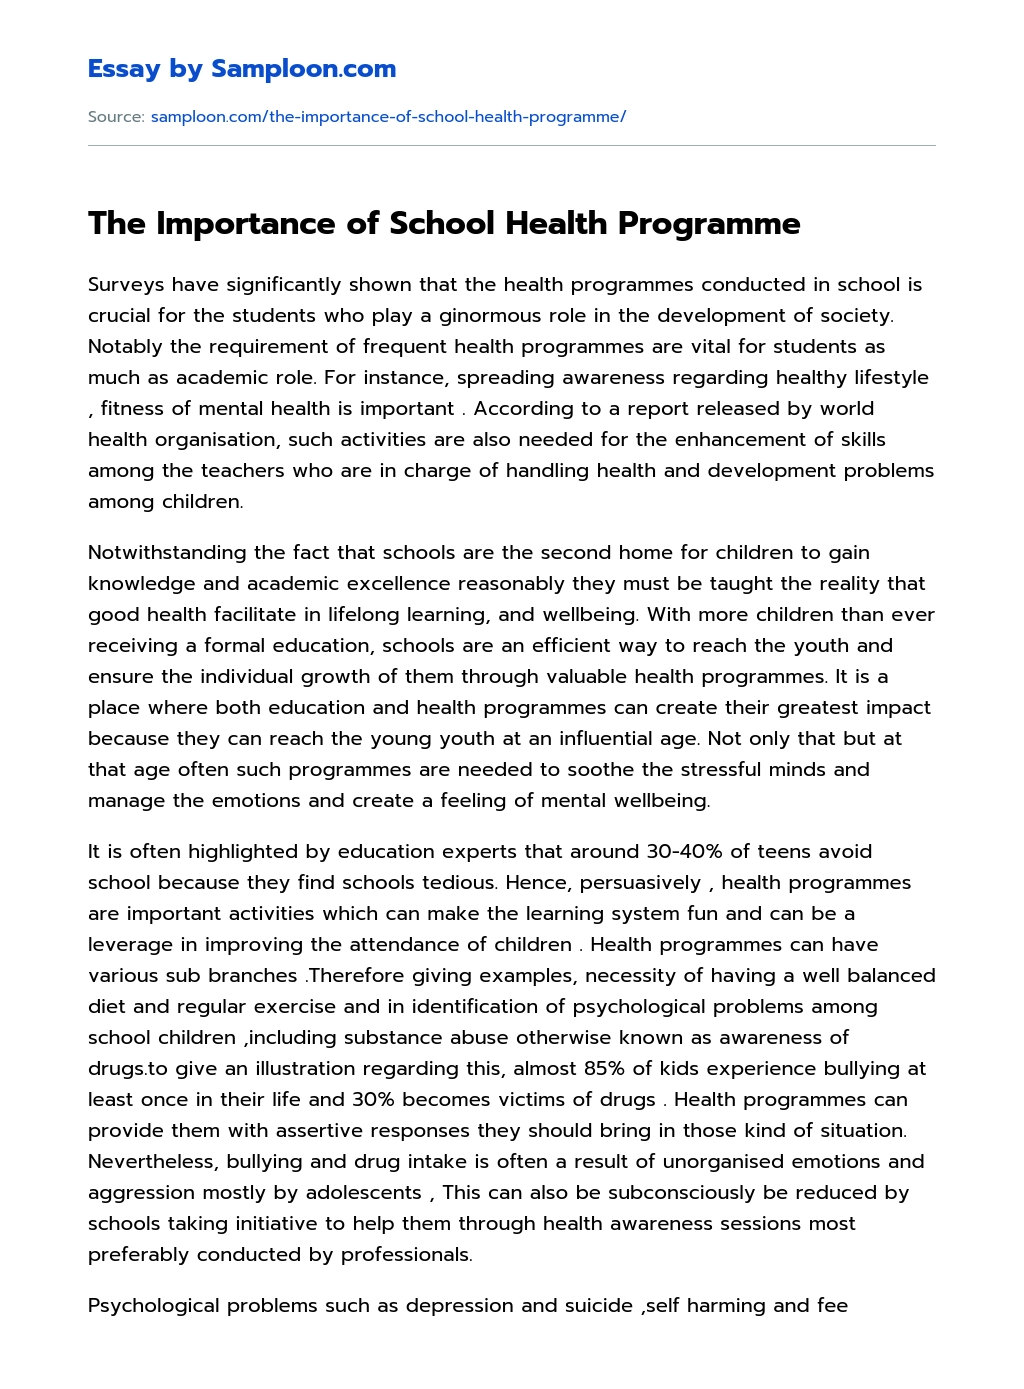 The Importance of School Health Programme essay